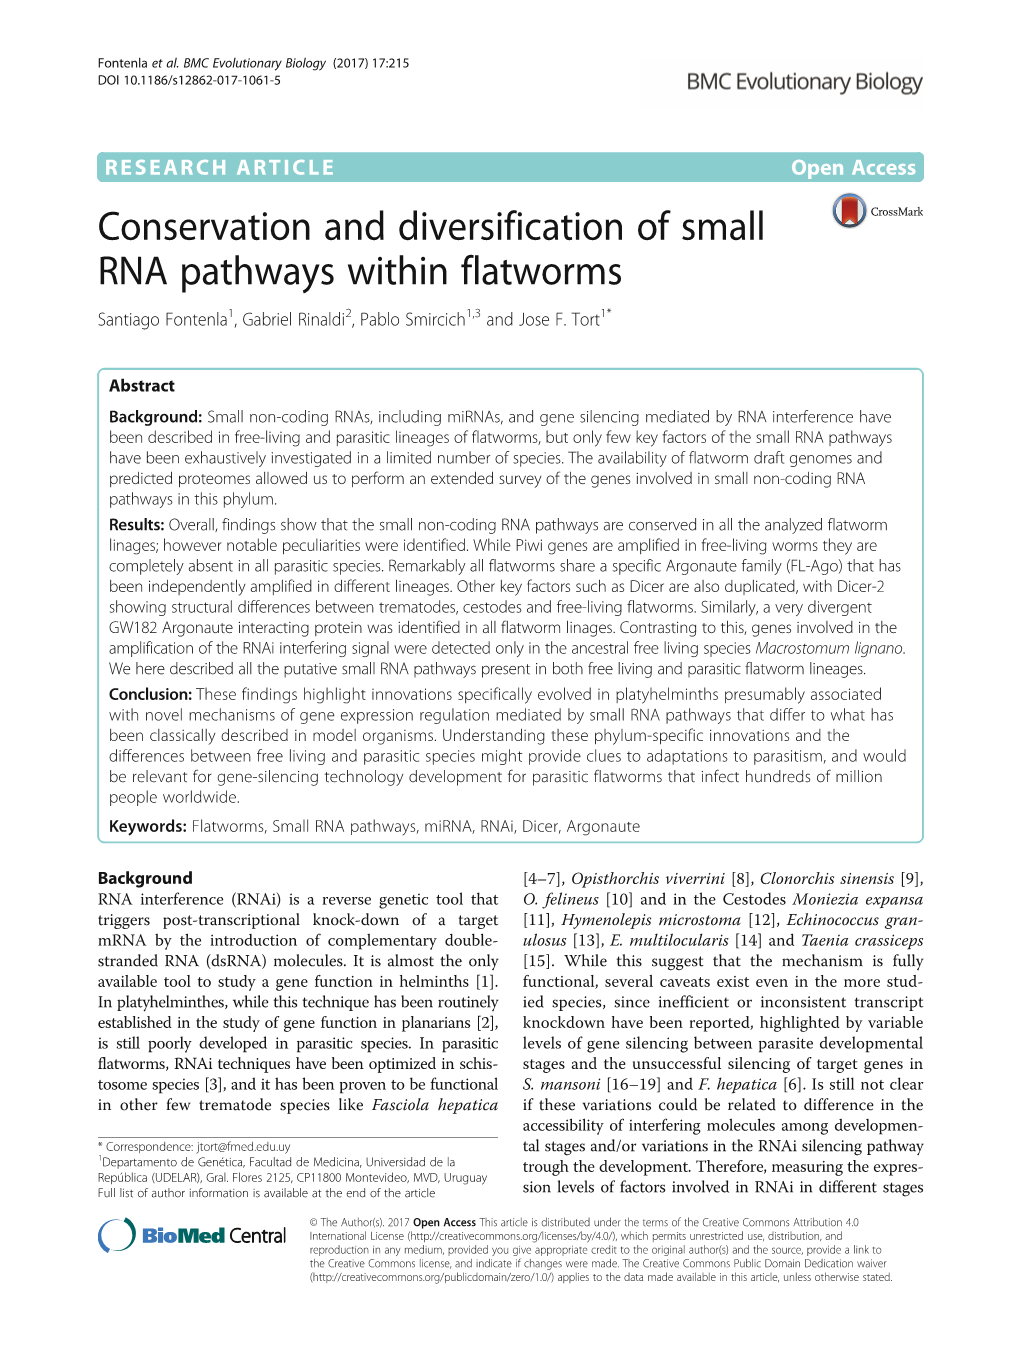 Conservation and Diversification of Small RNA Pathways Within Flatworms Santiago Fontenla1, Gabriel Rinaldi2, Pablo Smircich1,3 and Jose F